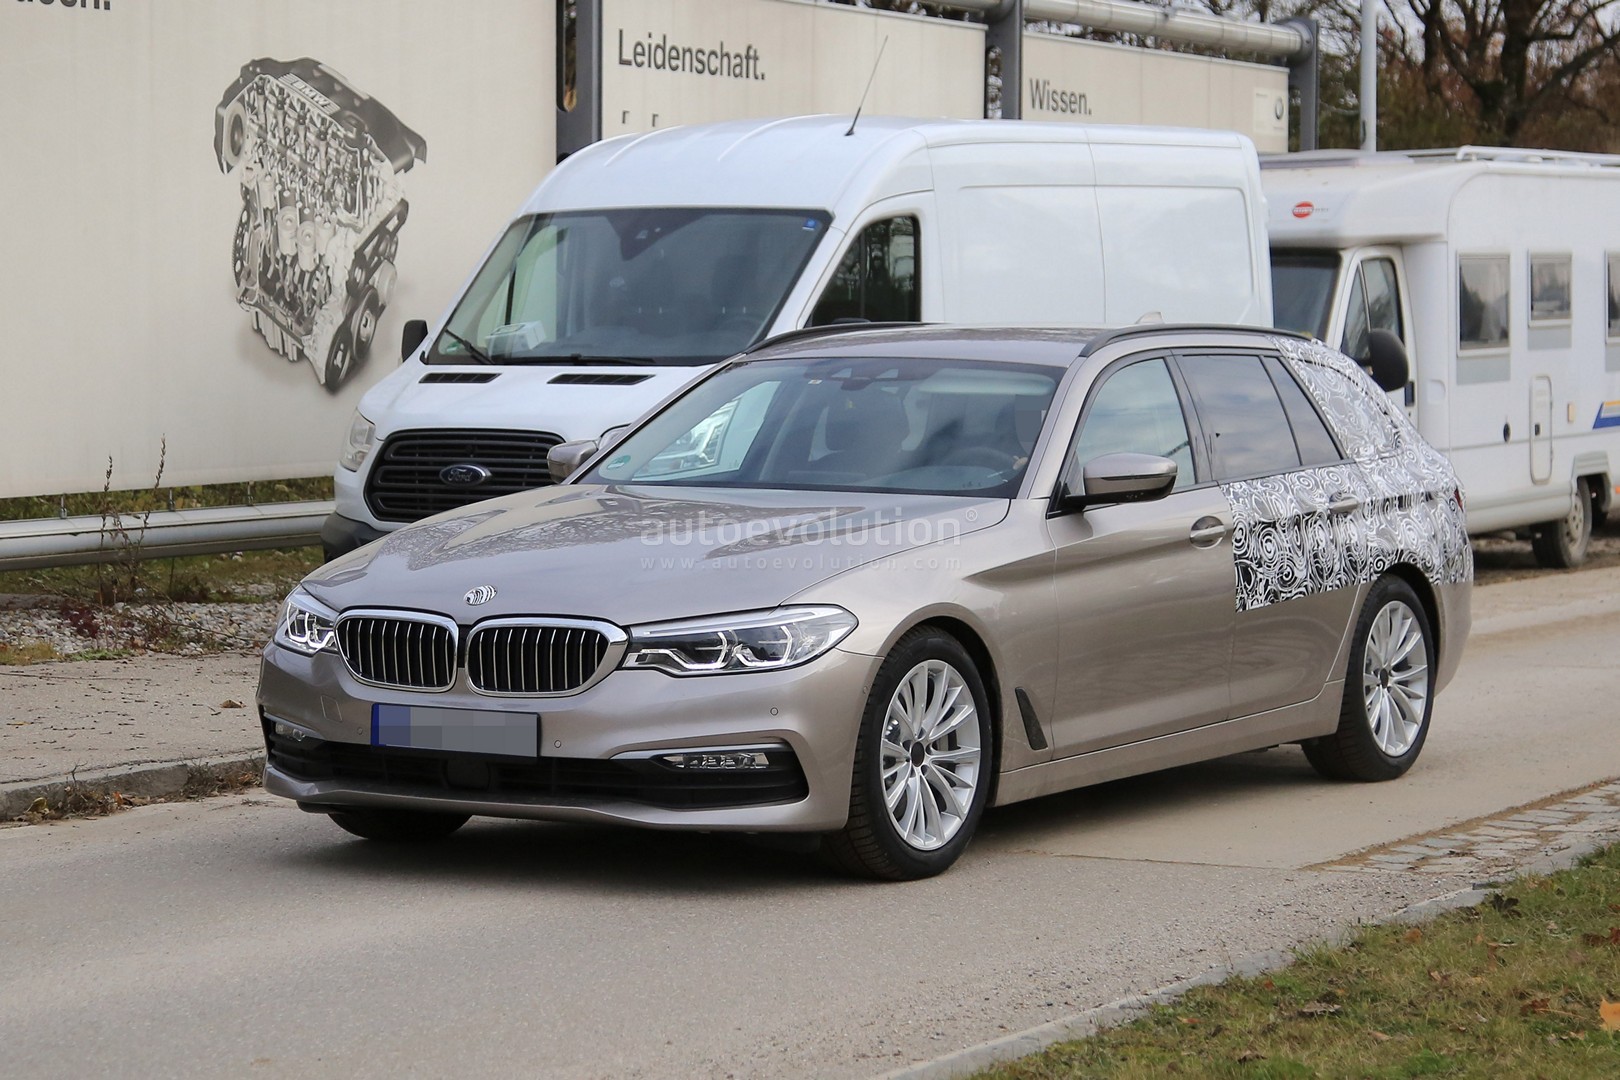 2016 - [BMW] Série 5 Berline & Touring [G30/G31] - Page 26 2017-bmw-5-series-touring-sheds-camo-likely-to-debut-in-geneva_2